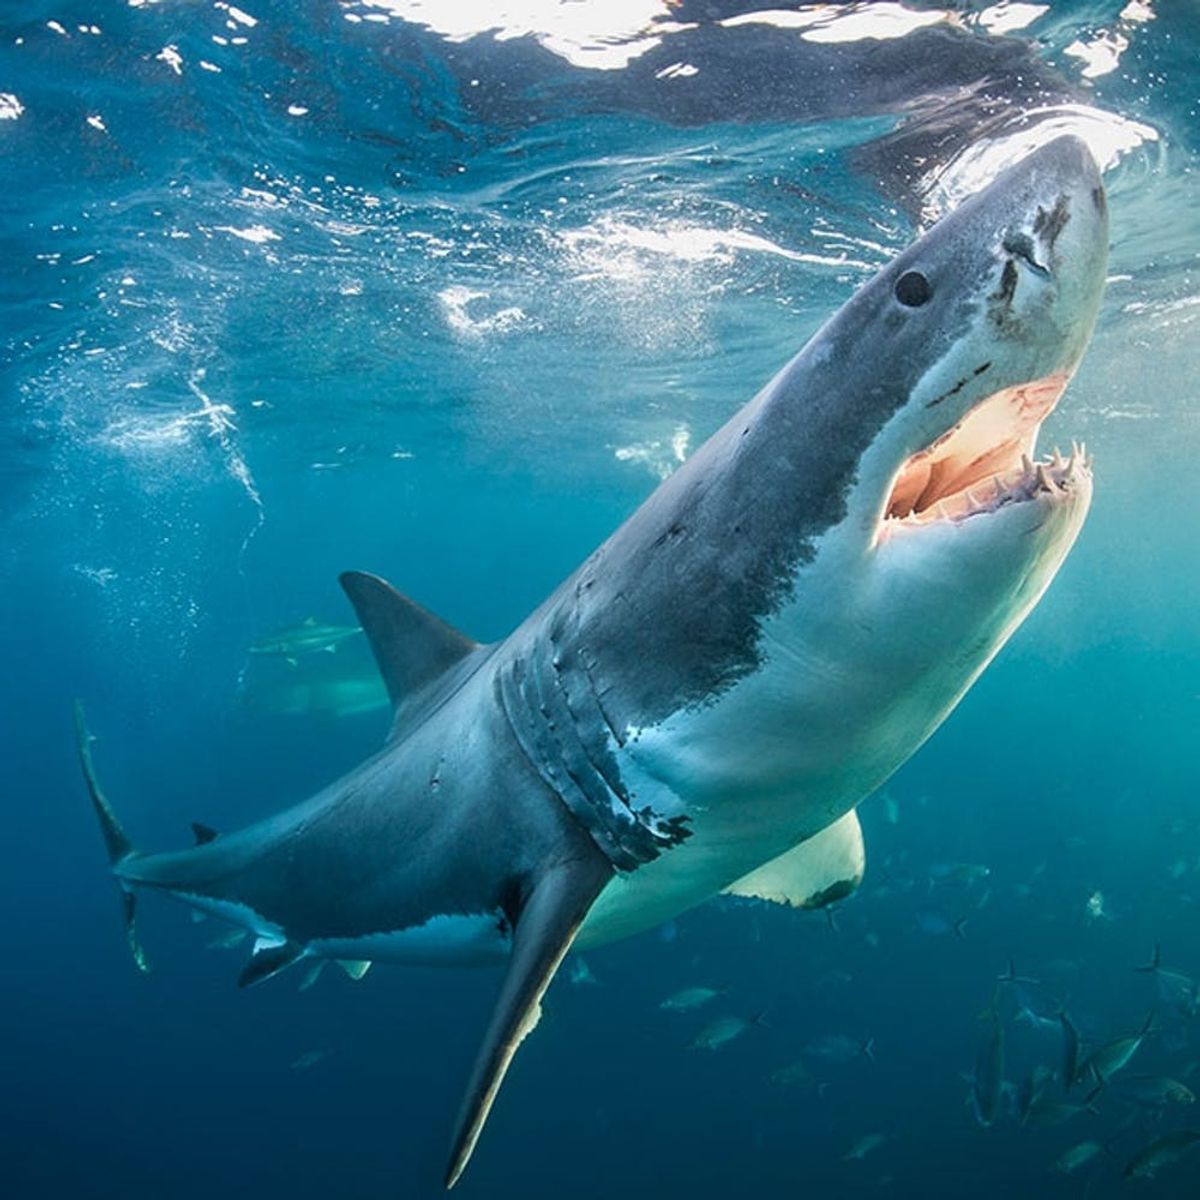 From South Africa to Bali, These Trips Let You Live Every Week Like It’s Shark Week